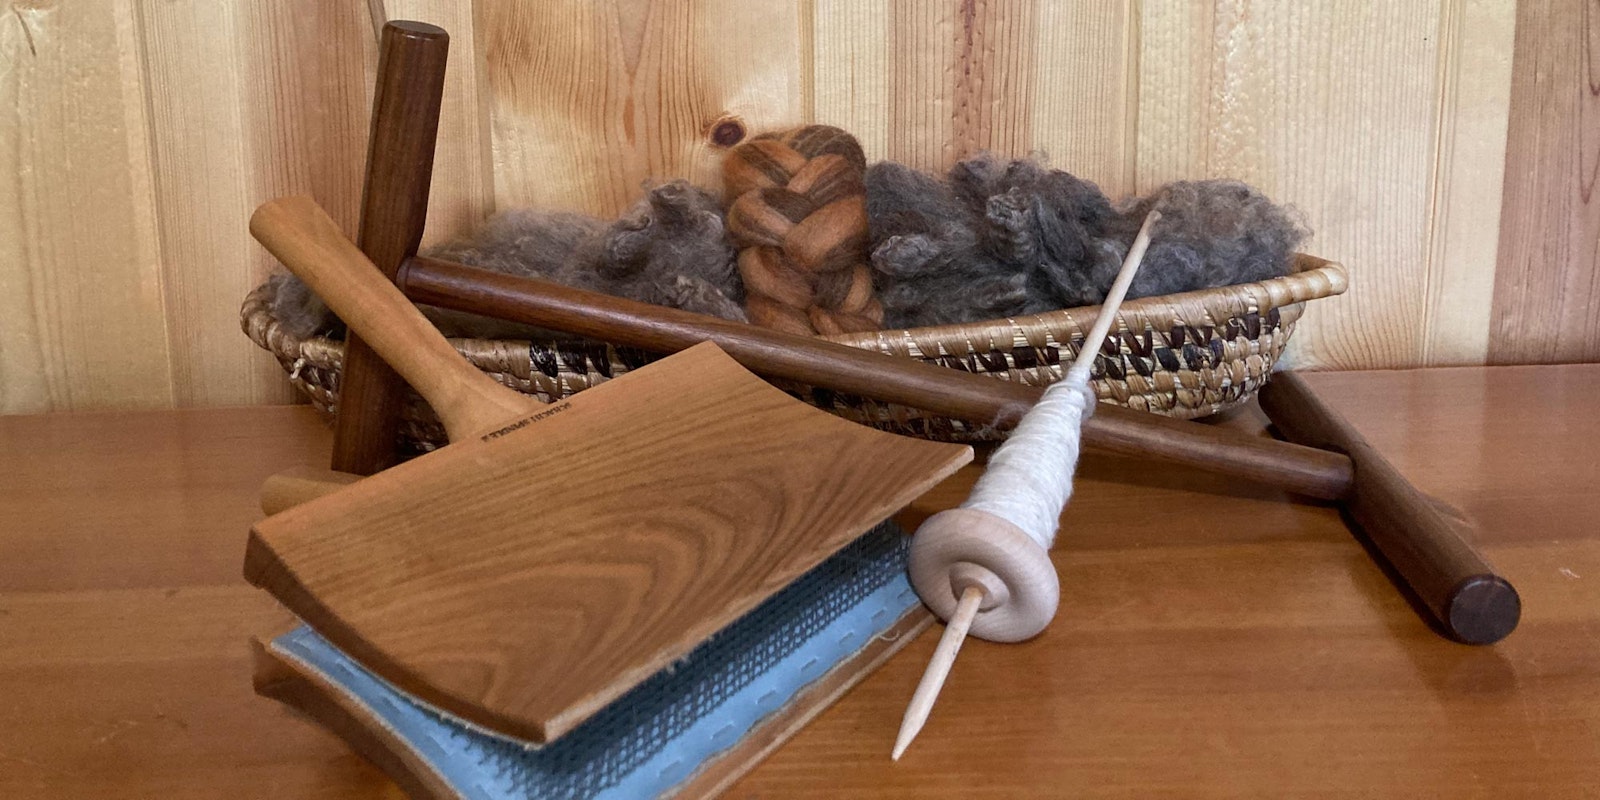 Tools of the Trade: What do I need to start spinning?